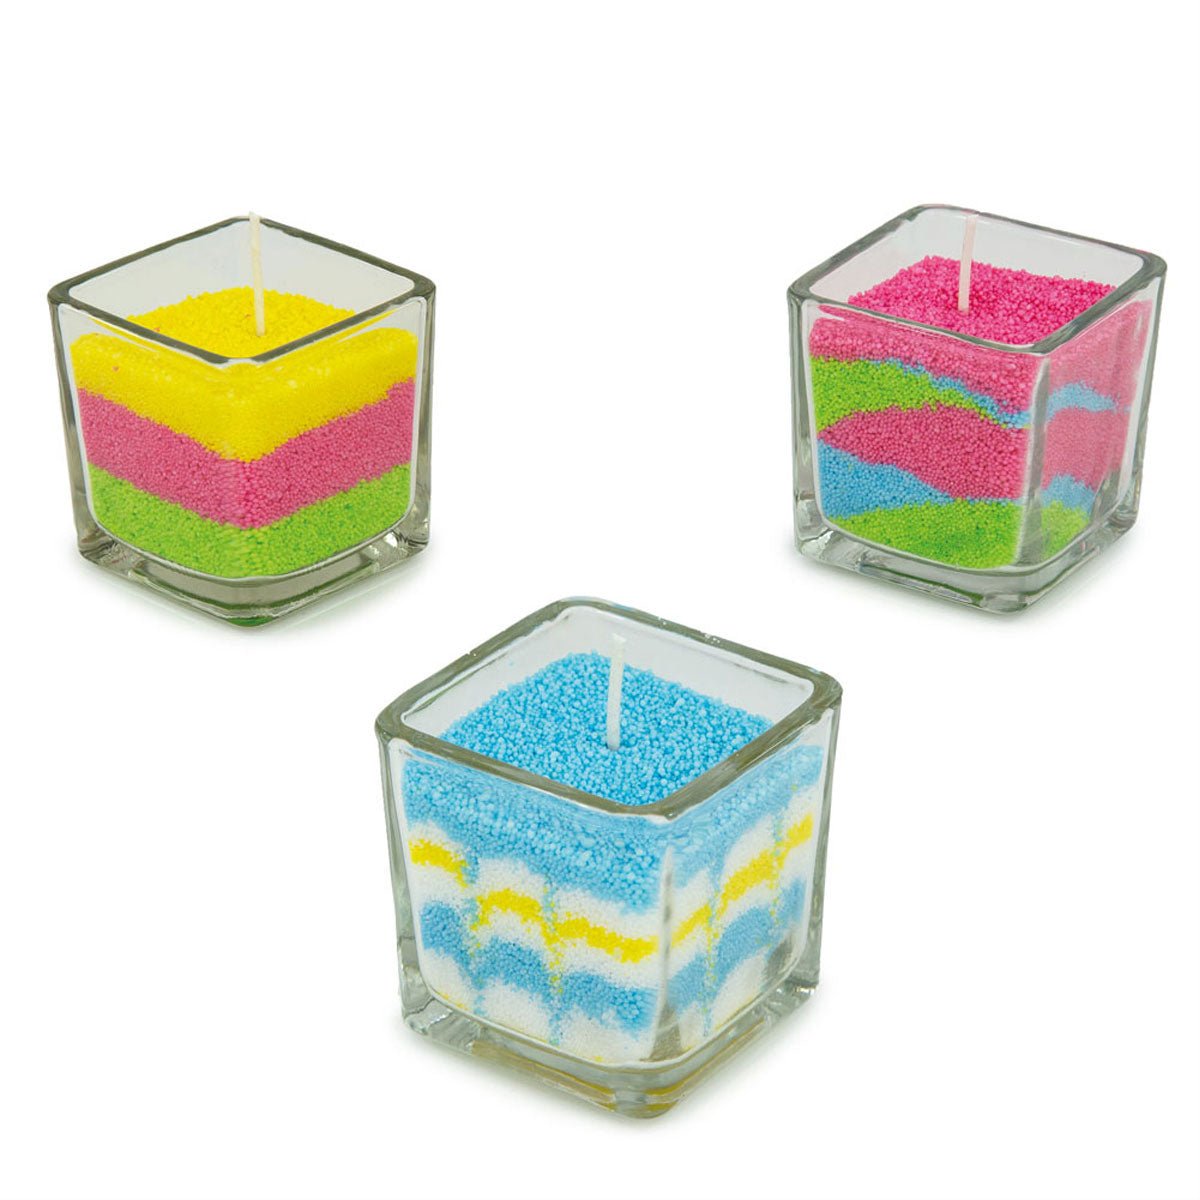 Out to Impress Creative Candles Craft Set